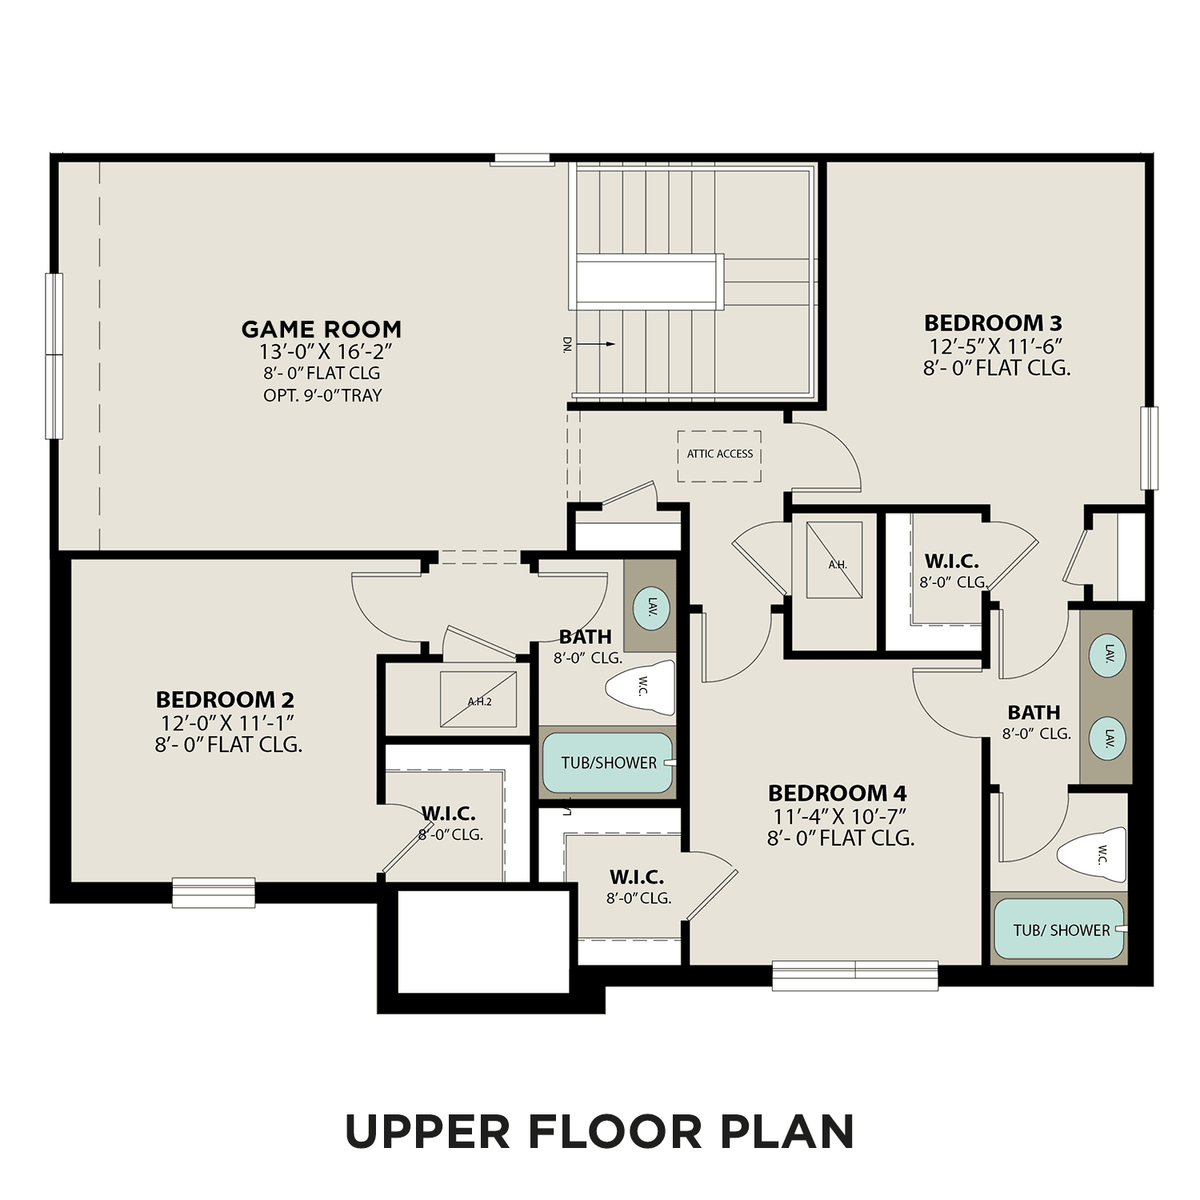 2 - The Sequoia A buildable floor plan layout in Davidson Homes' Sierra Vista community.